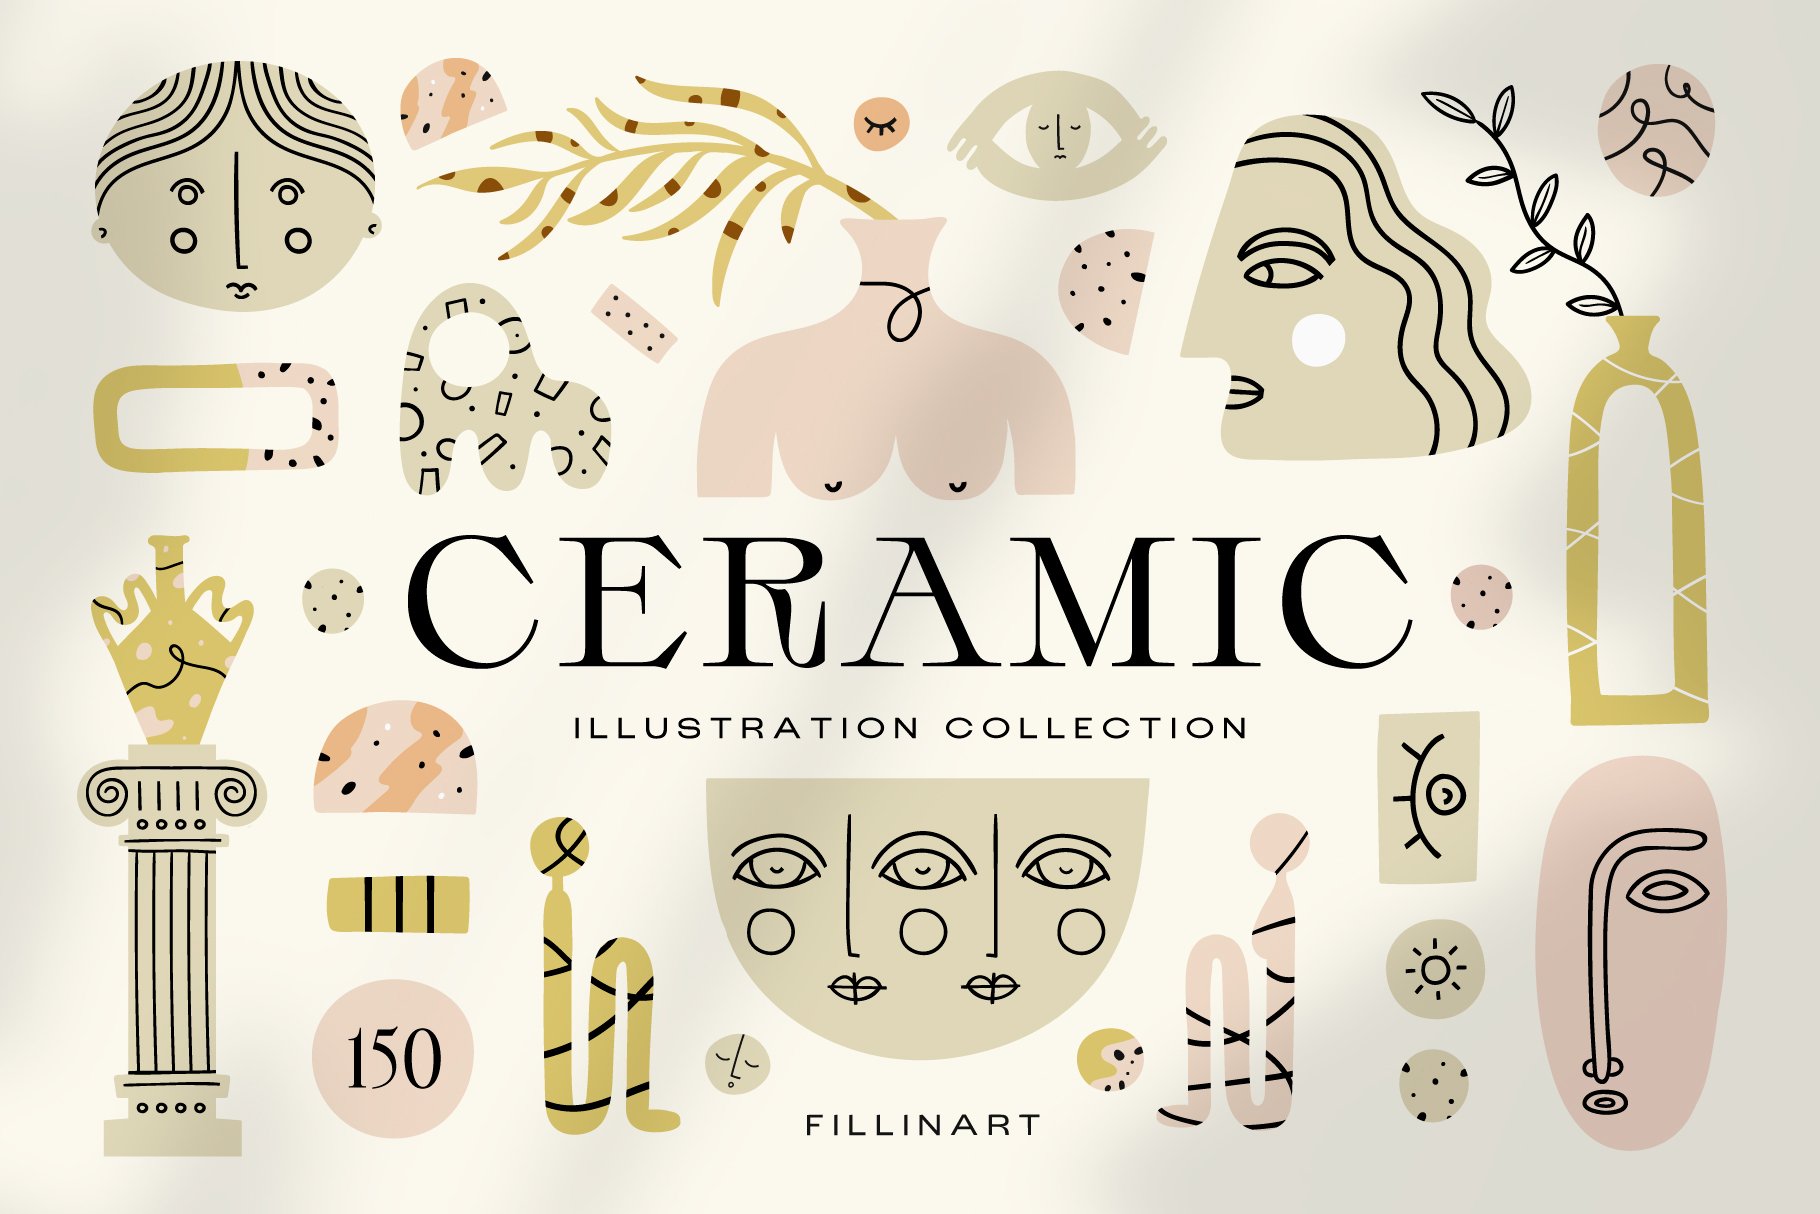 Ceramic — illustration collection cover image.